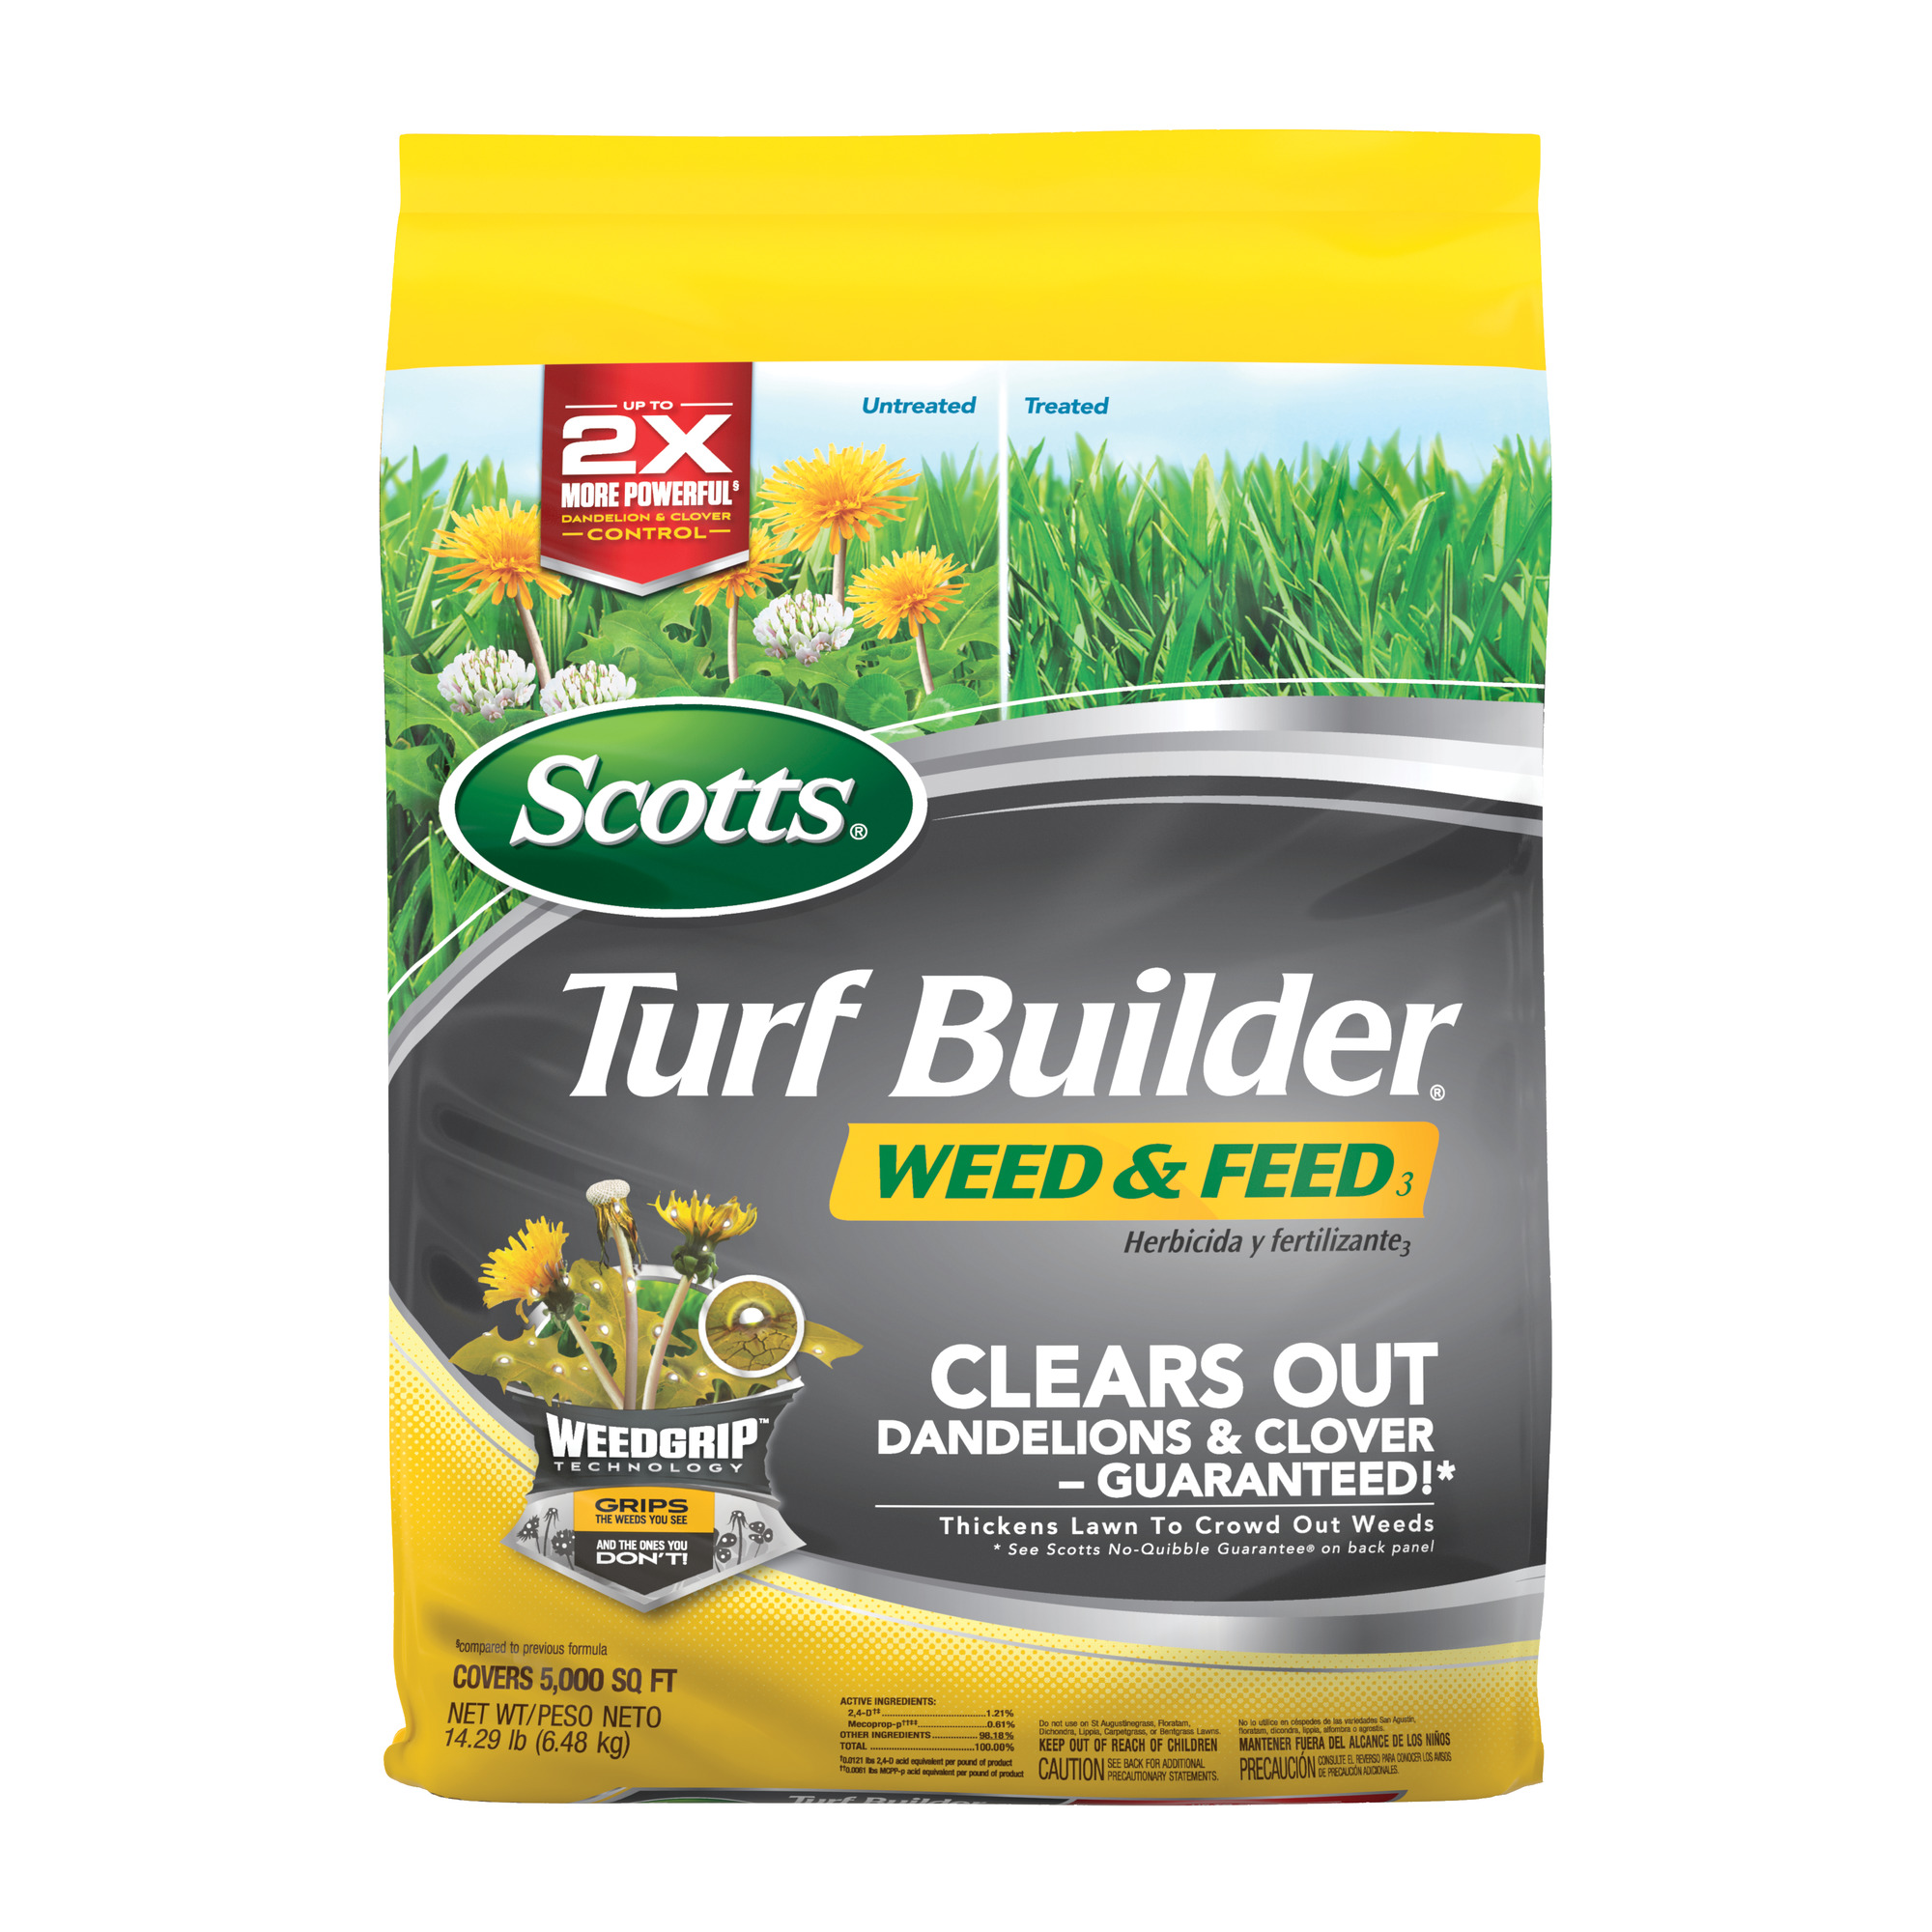 Scotts Turf Builder Weed & Feed3, 5,000 sq. ft., 14.29 lbs. - image 1 of 10